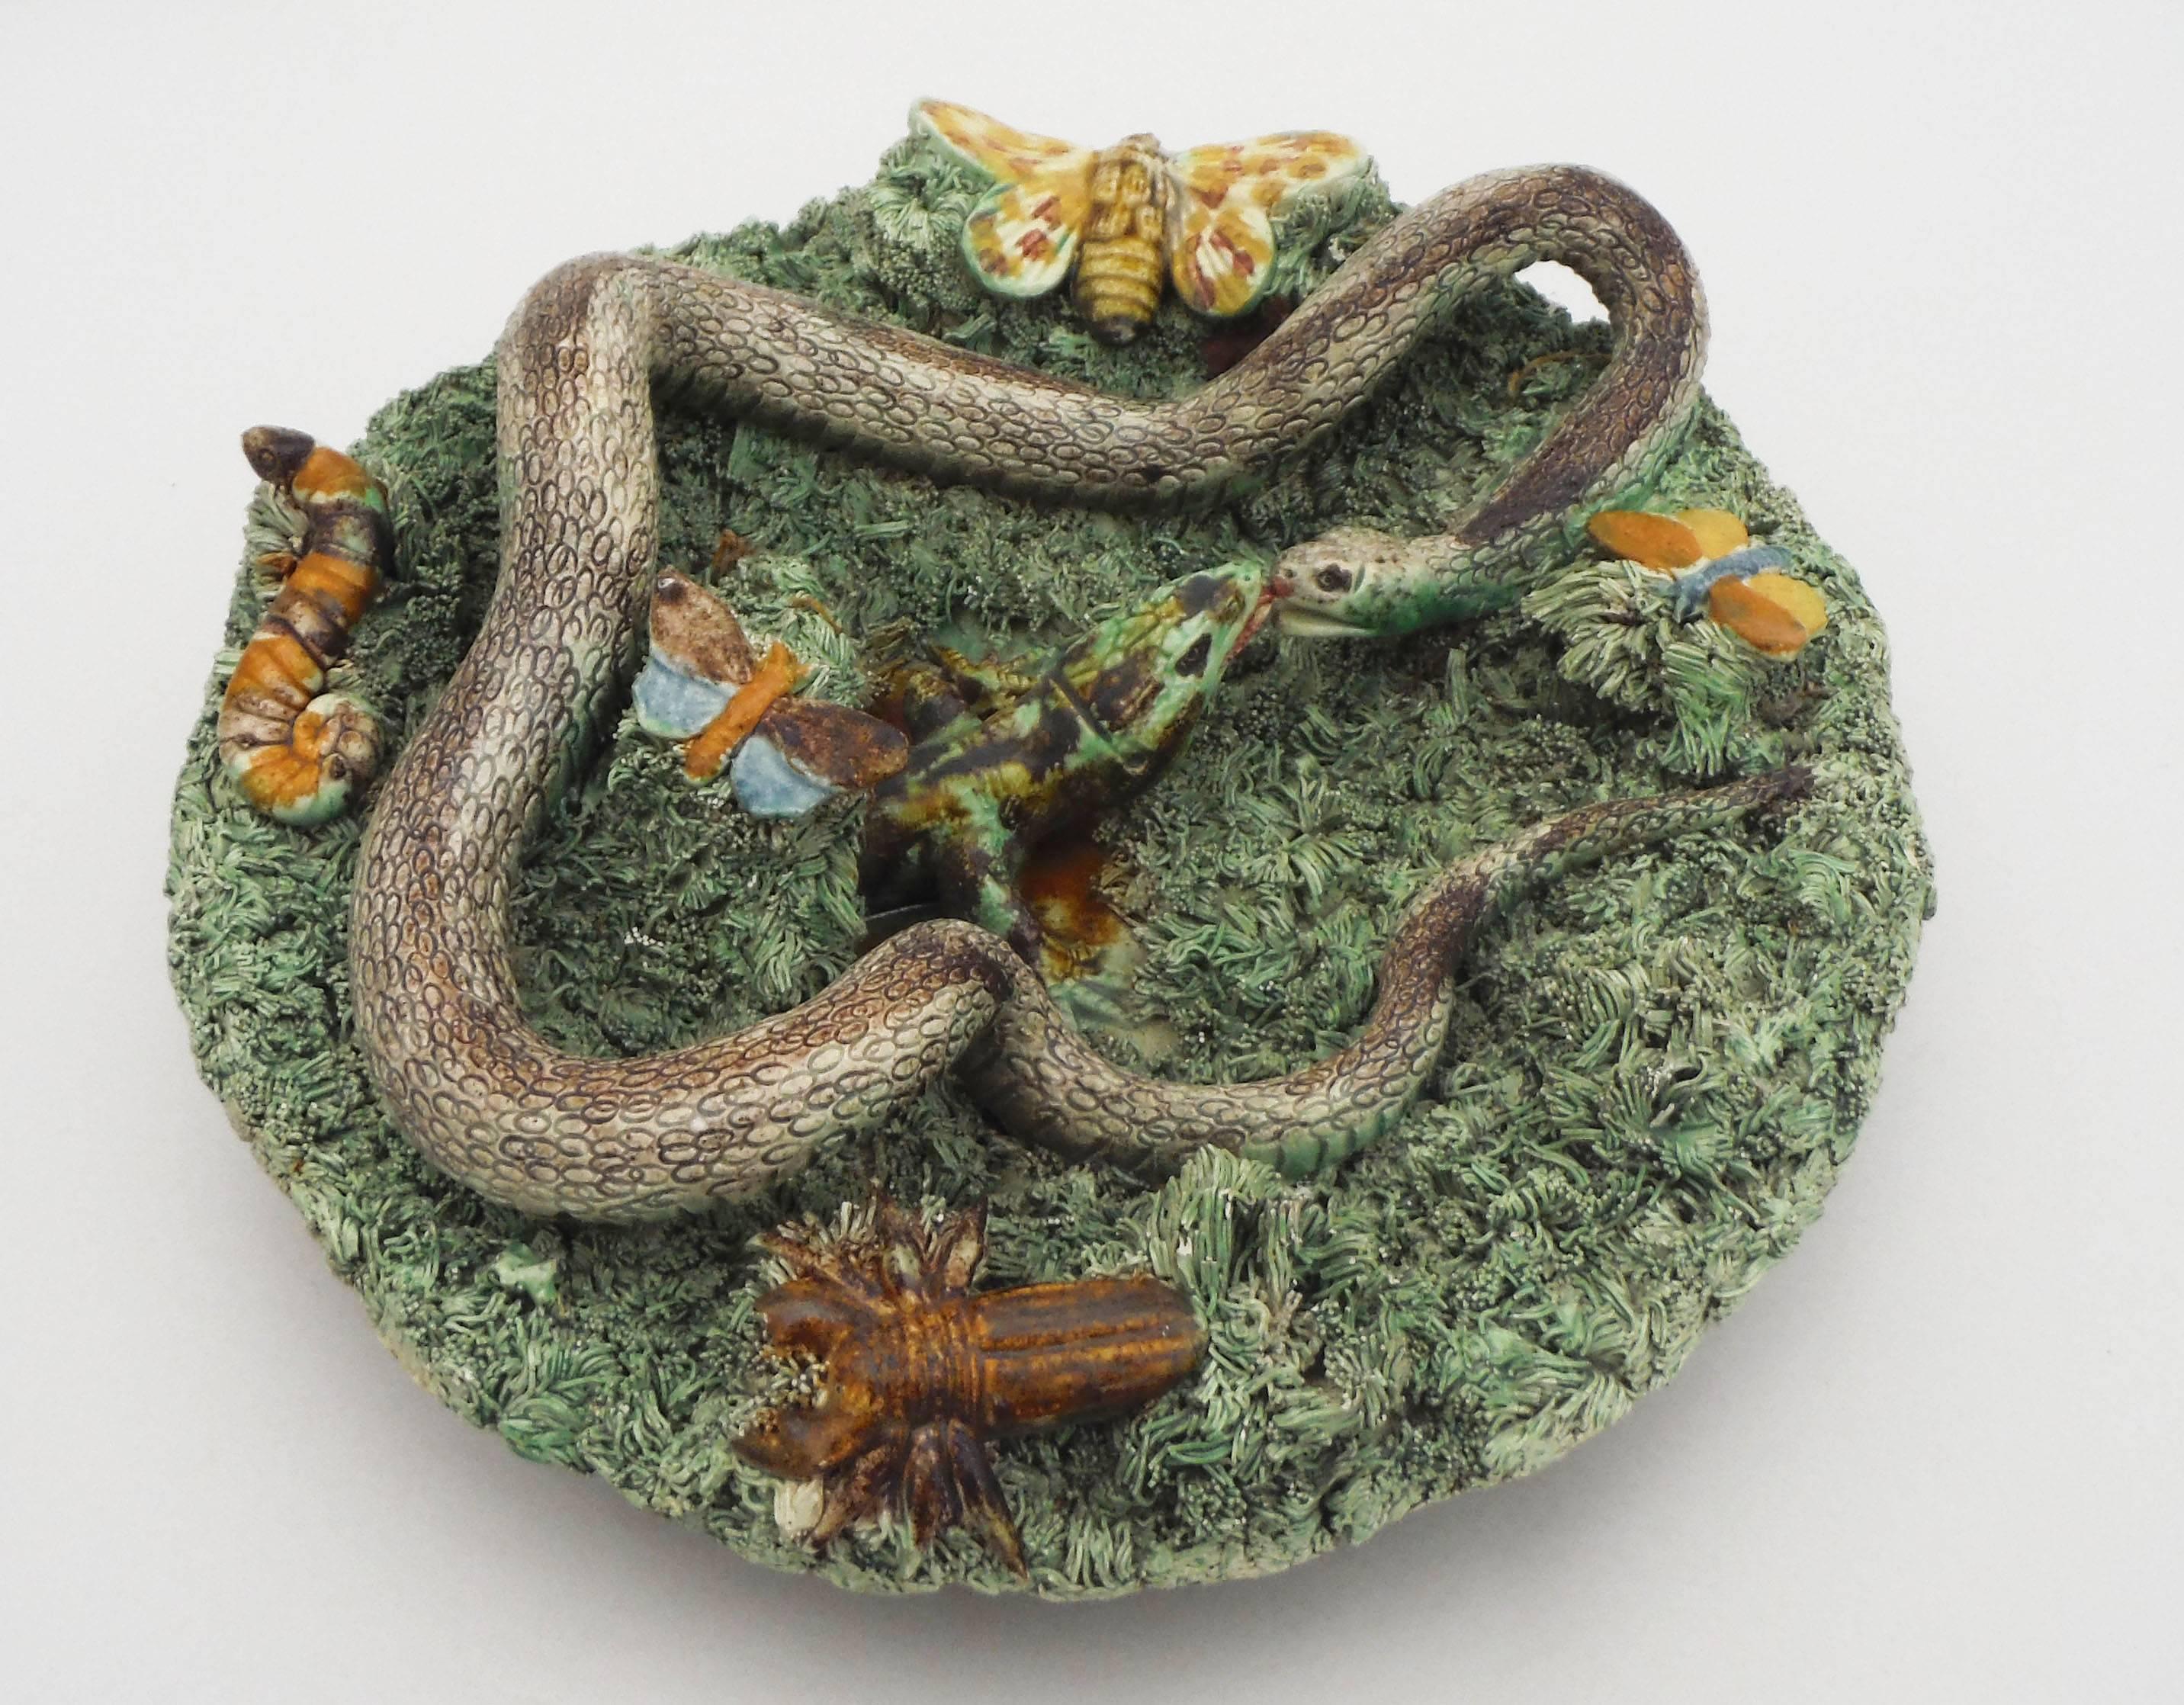 Antique 19th century Portuguese Majolica Palissy style signed Jose Alves Cunha
(Caldas da Rainha), with snake, worm, caterpillar, butterfly and bug.